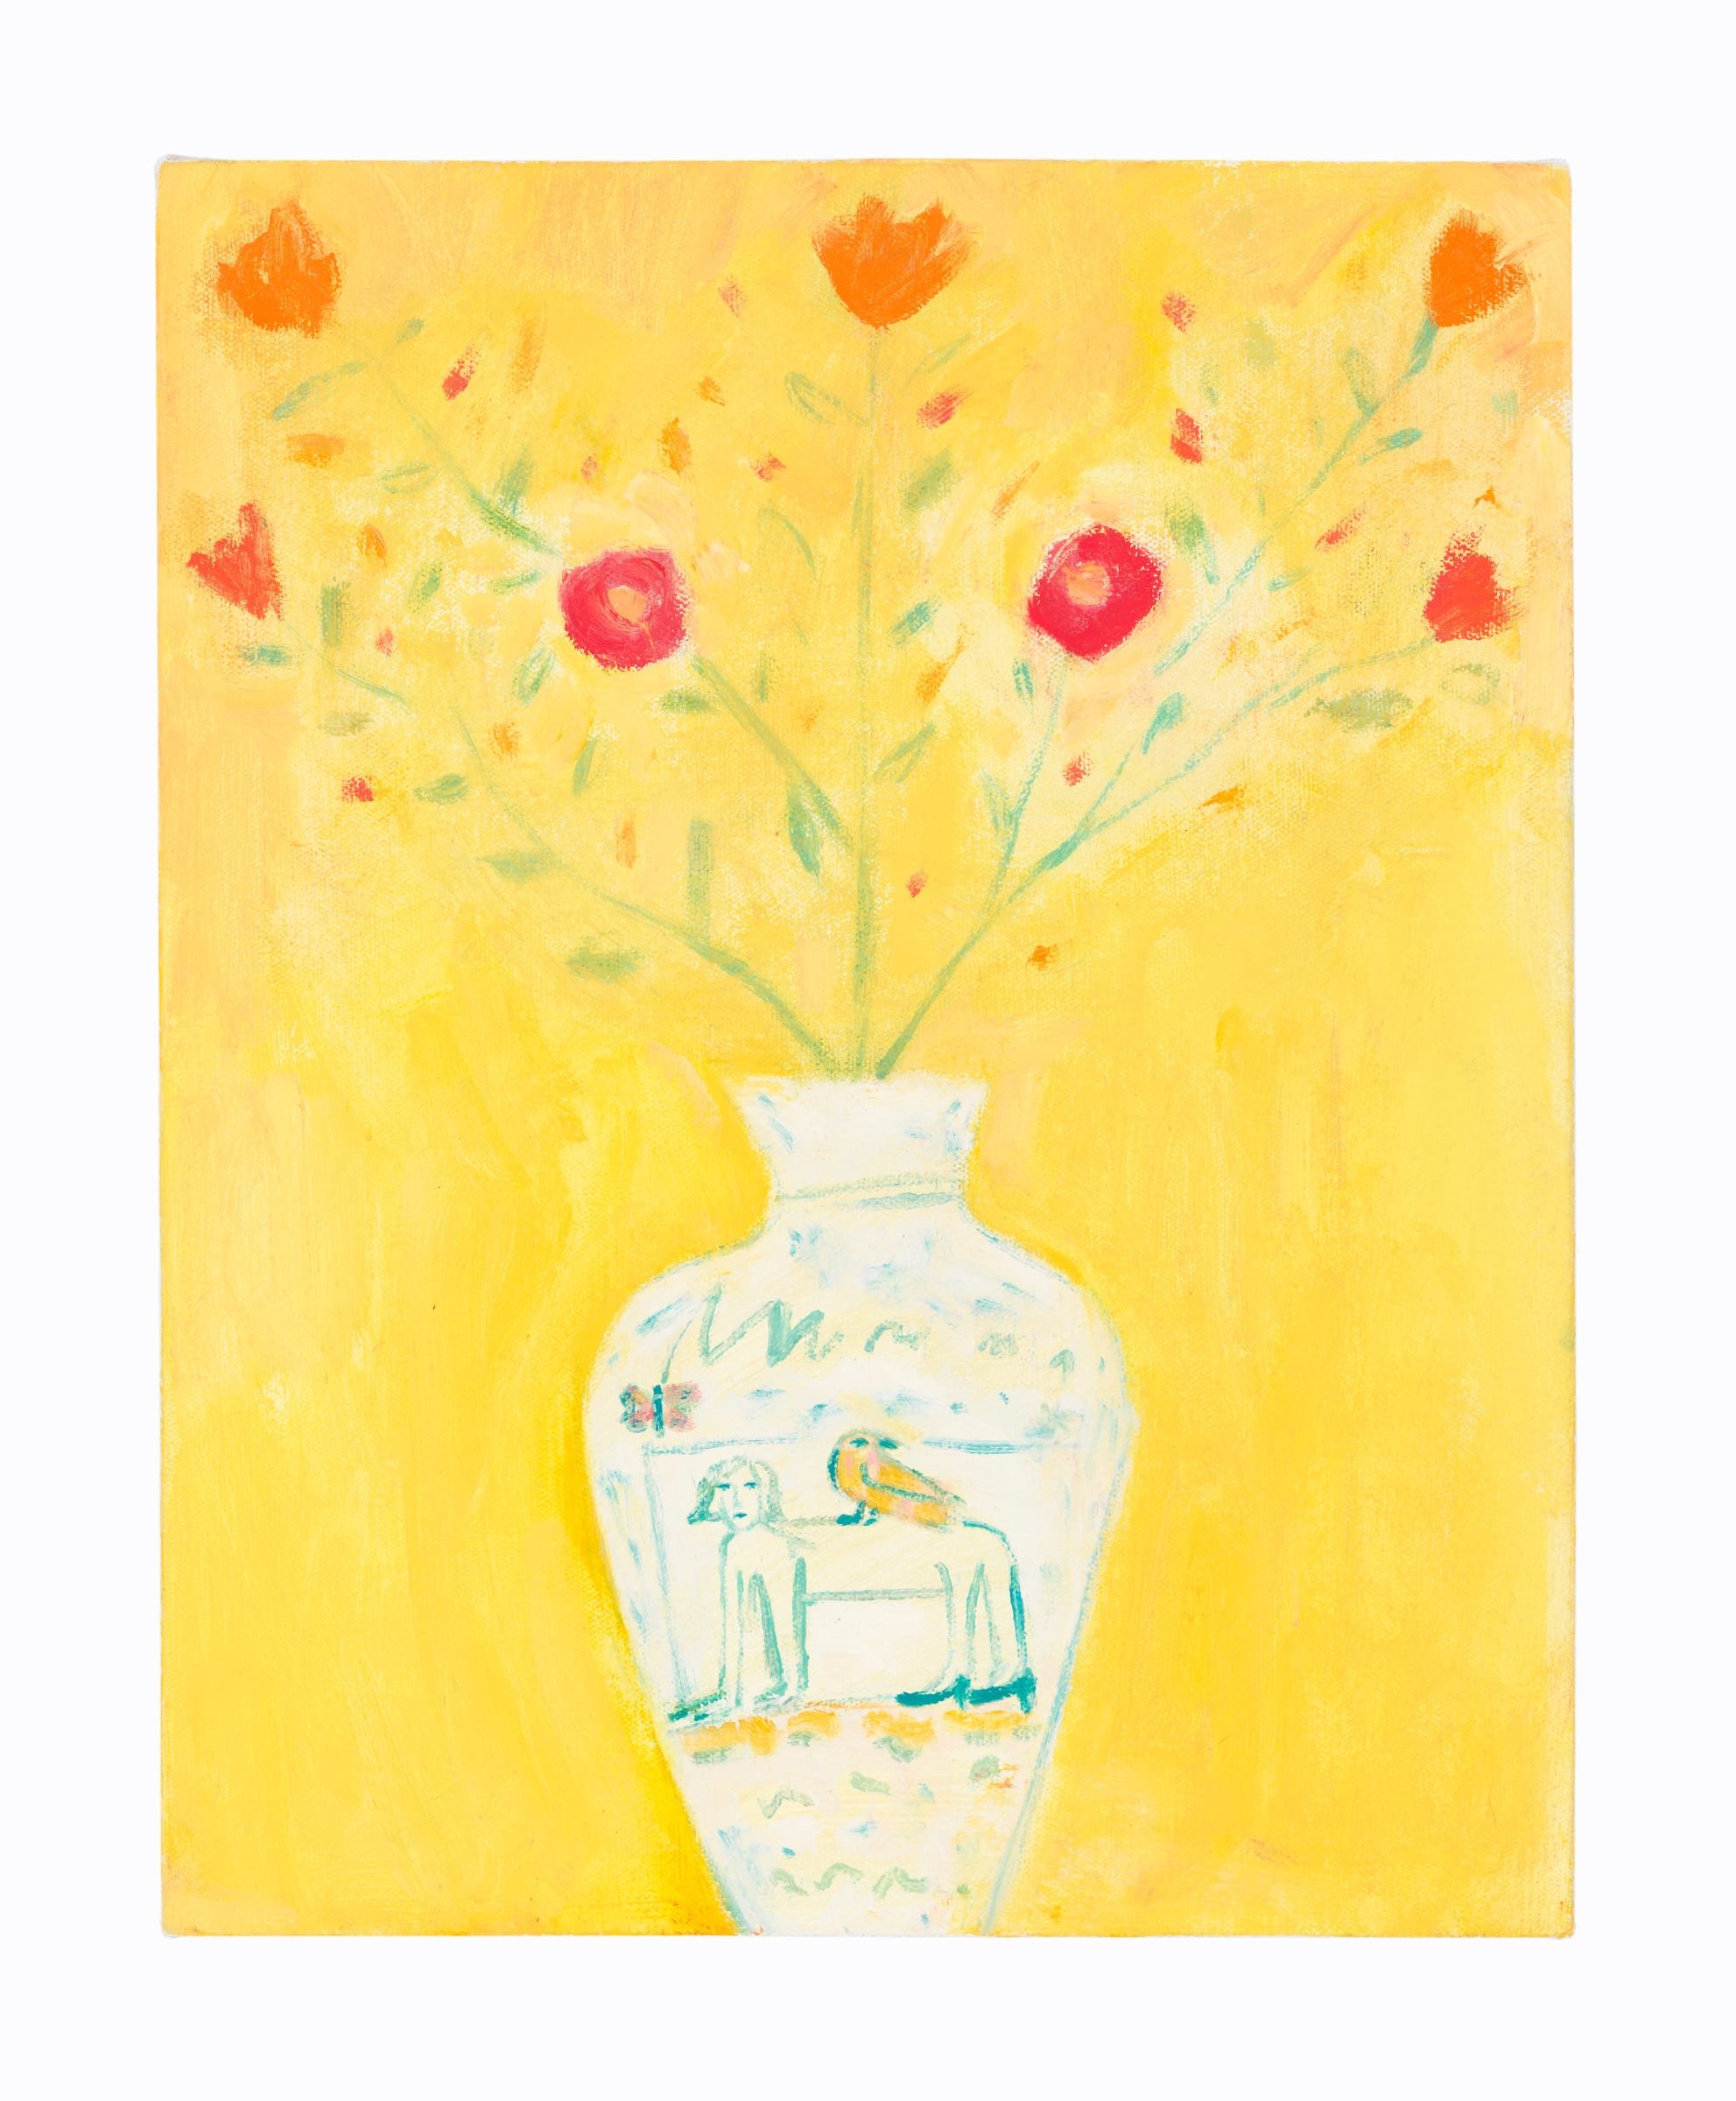   Vase with Pink and Orange Flowers,  oil on canvas stretched over panel, 11x14”, 2022 